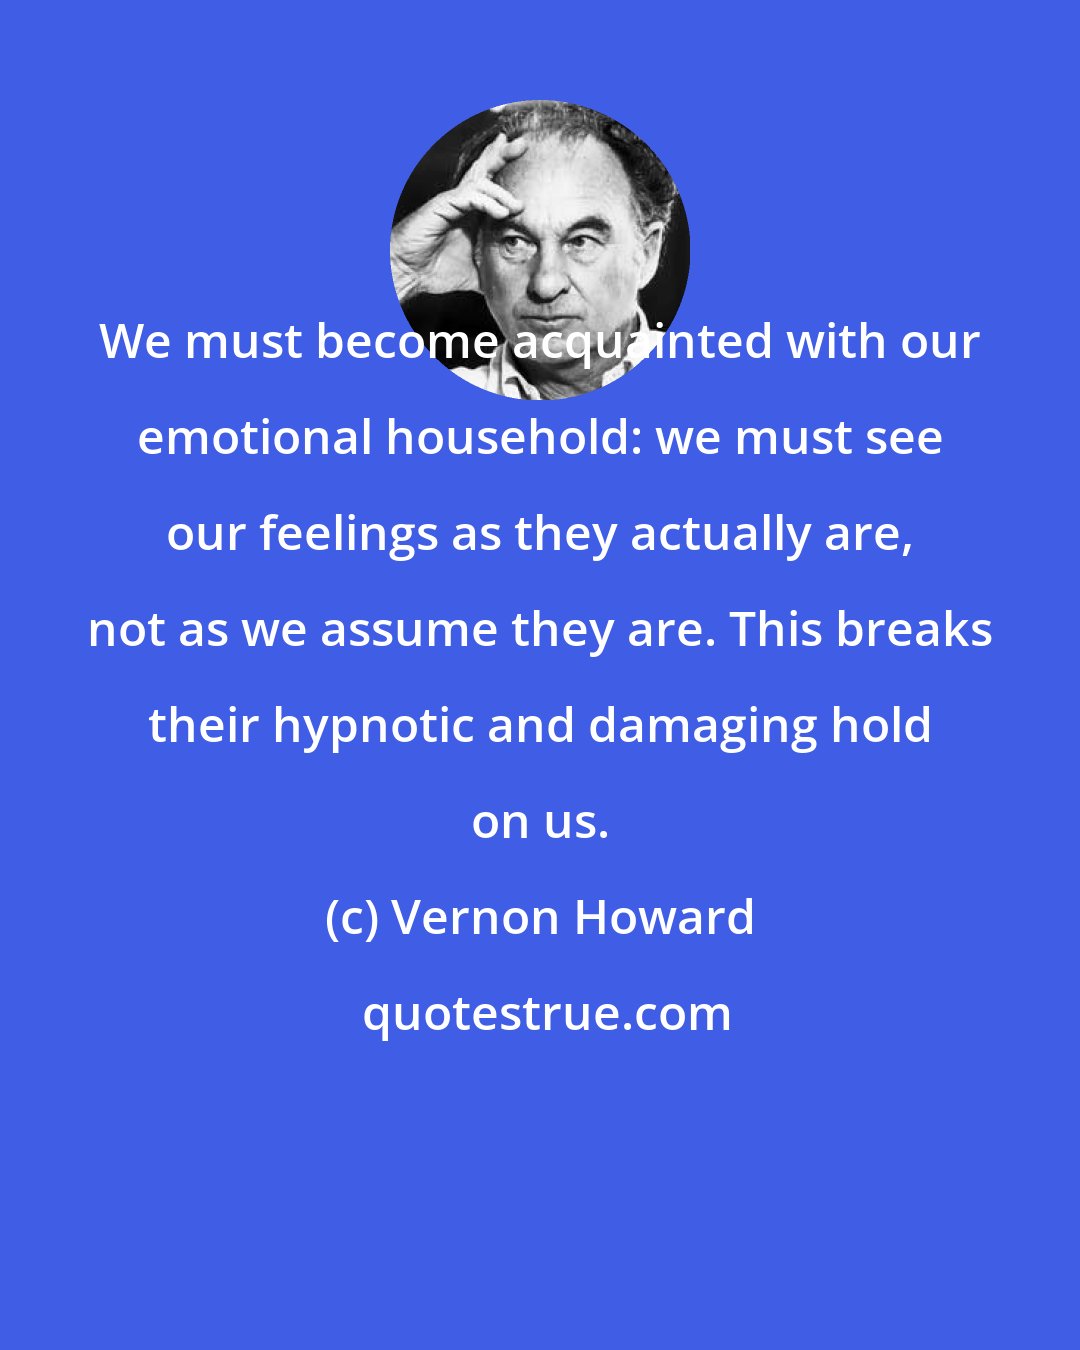 Vernon Howard: We must become acquainted with our emotional household: we must see our feelings as they actually are, not as we assume they are. This breaks their hypnotic and damaging hold on us.